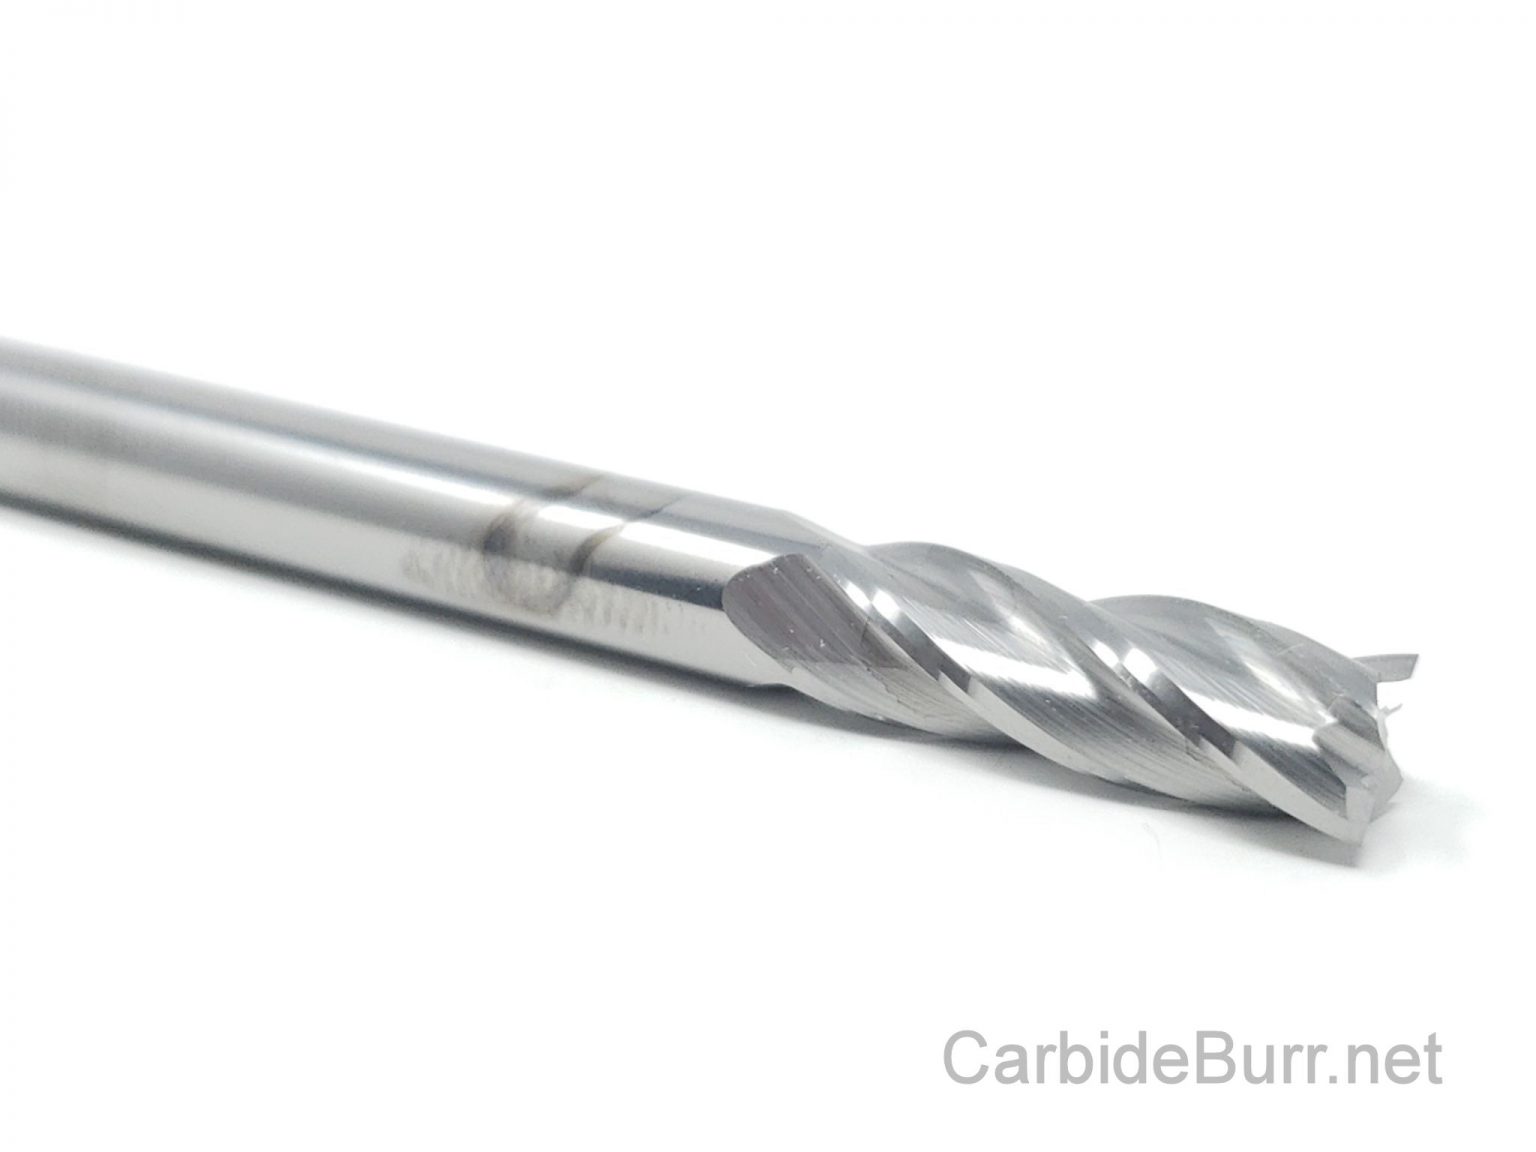 Solid Carbide End Mill EM4-0250 High Quality Tools Made in USA